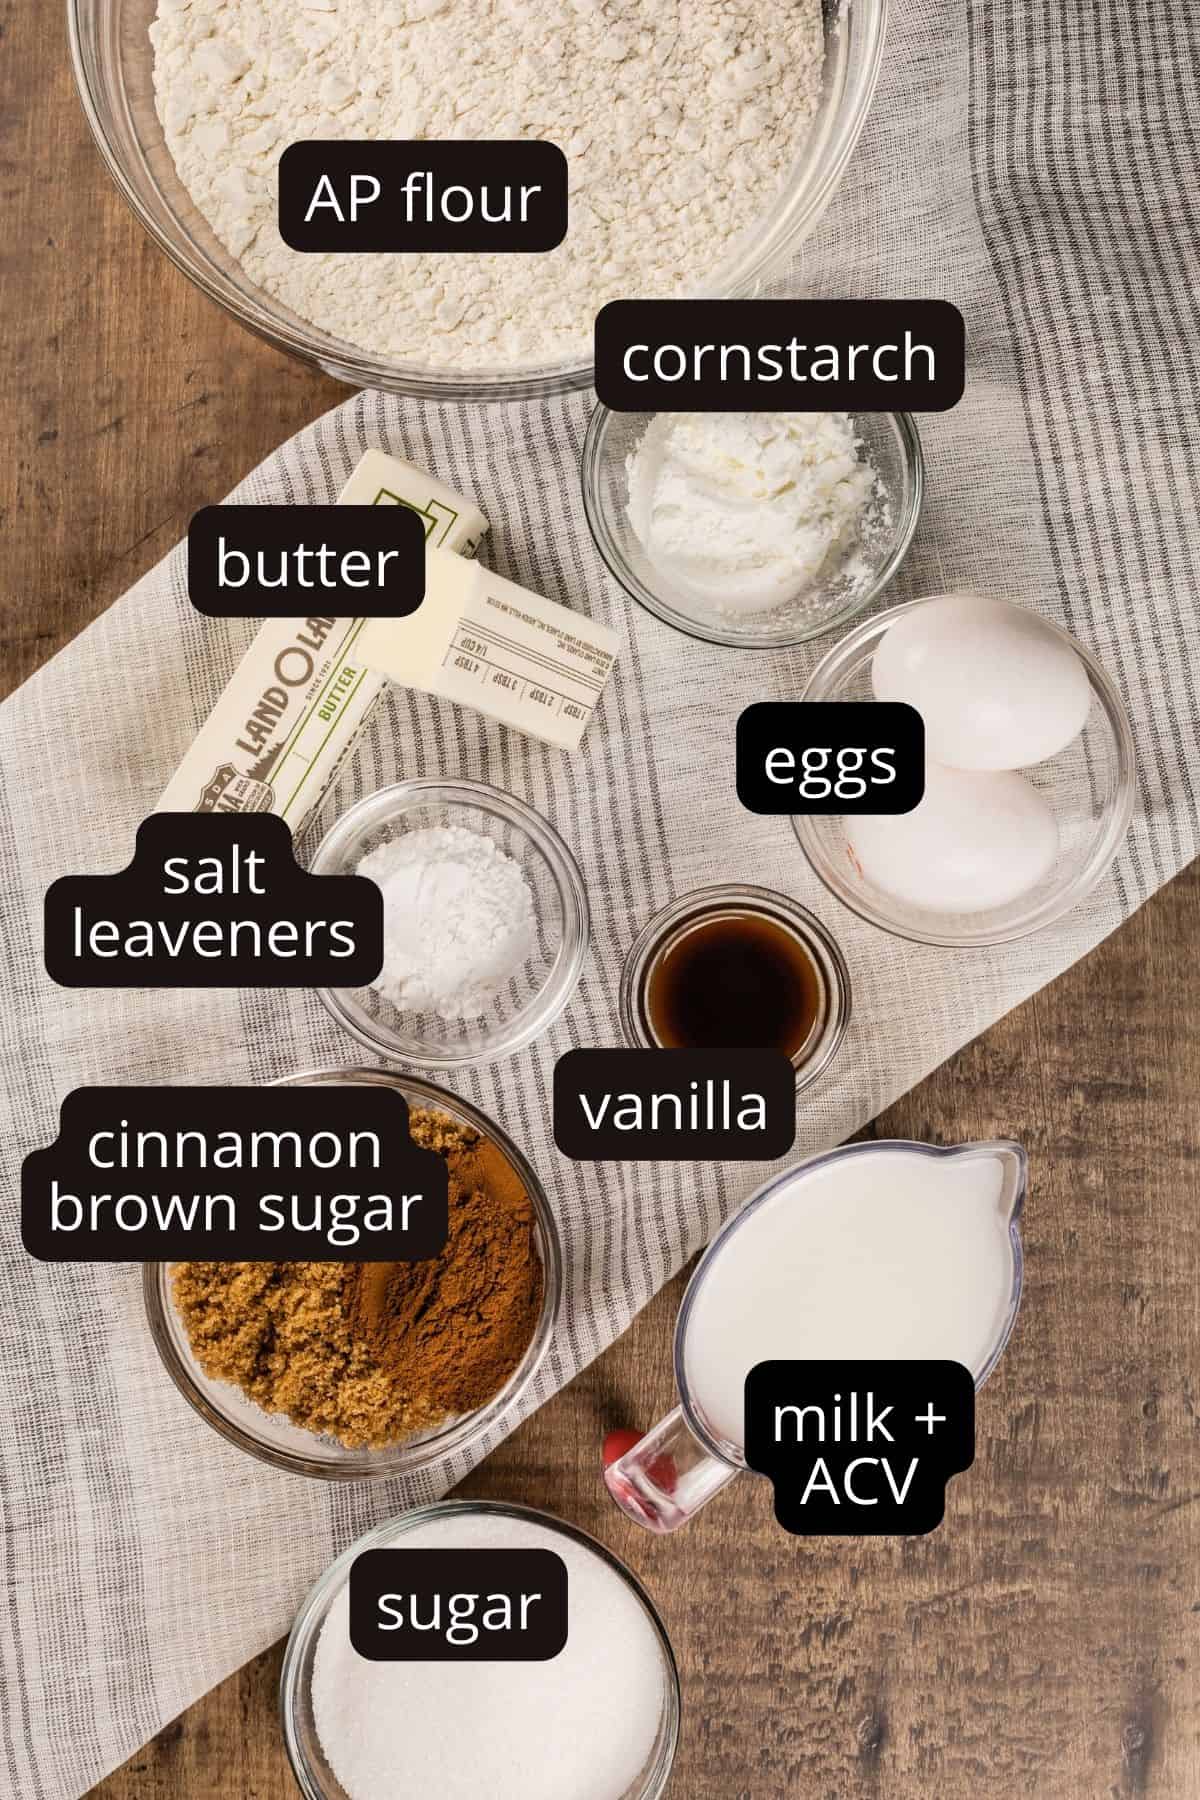 ingredients for cinnamon rolls without yeast in various glass bowls on a wood tabletop. a white and gray towel is also seen. black and white labels have been added to identify each ingredient.